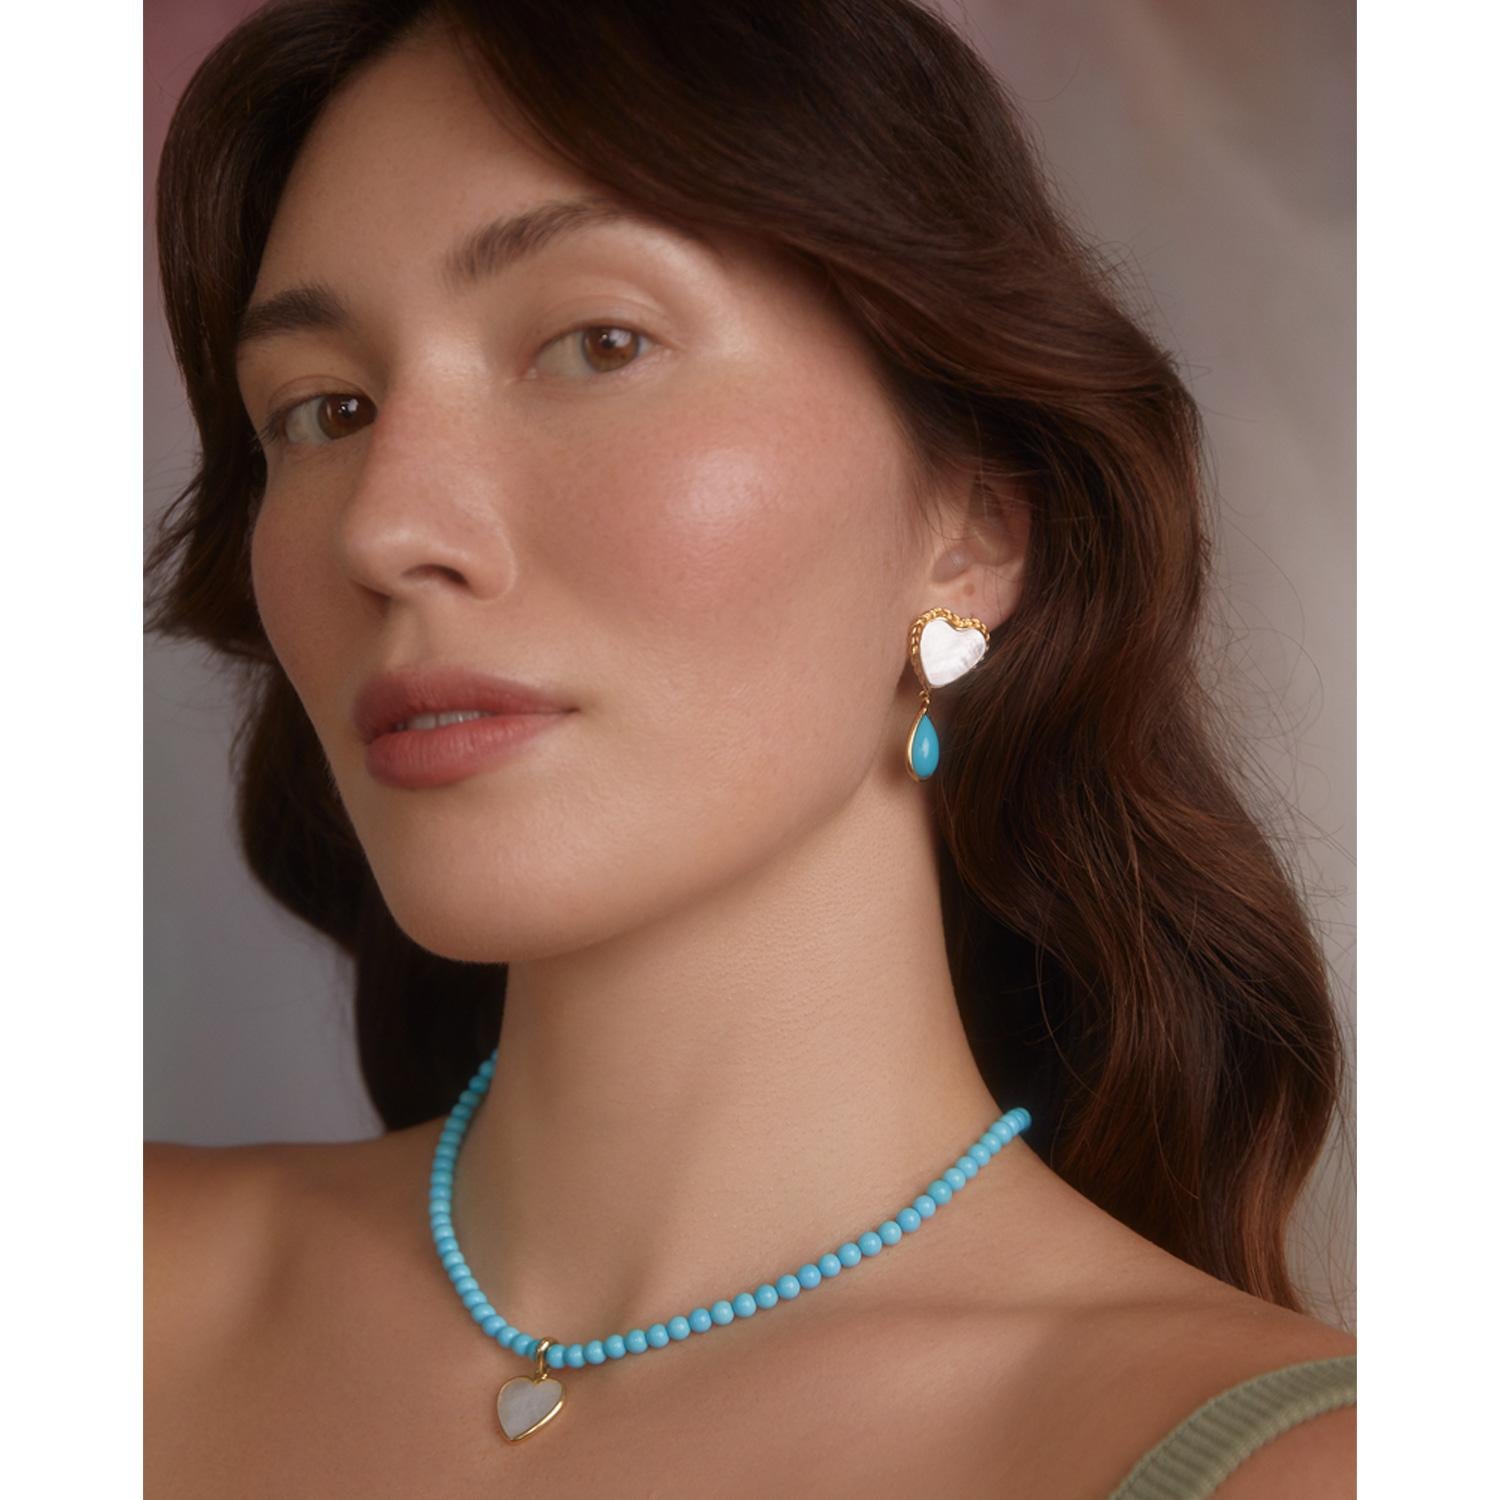 These glamorous Happy Hearts earrings by Vintouch Jewels are handcrafted in Italy, featuring lustrous heart-shaped mother of pearl enriched by deep blue drop-shaped genuine turquoise, ethically sourced from Arizona. Meticulously handcrafted from